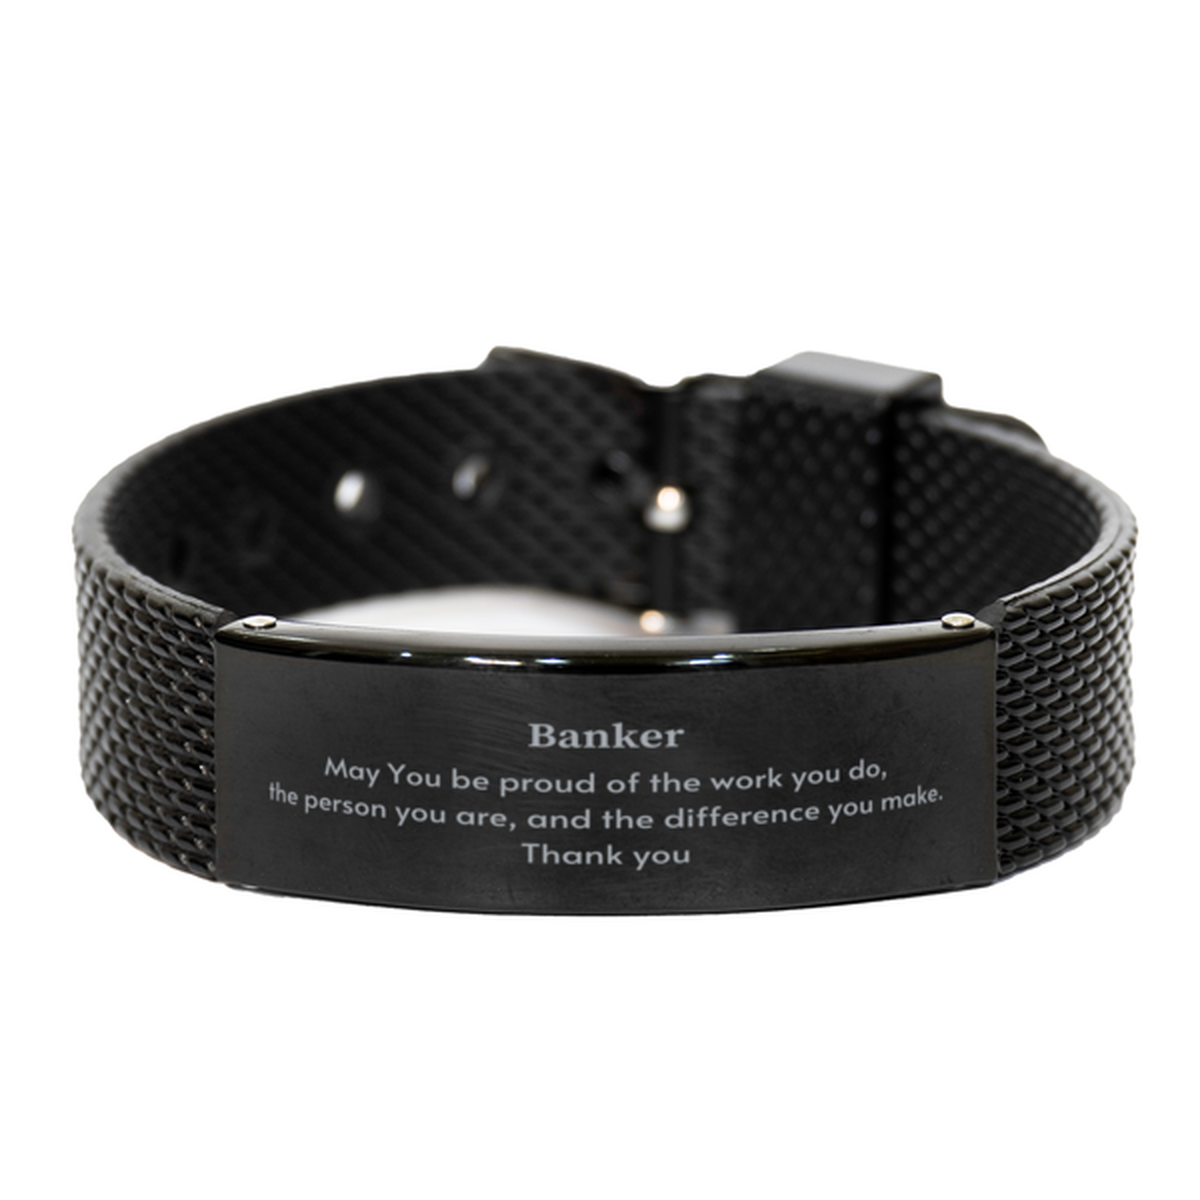 Heartwarming Black Shark Mesh Bracelet Retirement Coworkers Gifts for Banker, Banker May You be proud of the work you do, the person you are Gifts for Boss Men Women Friends